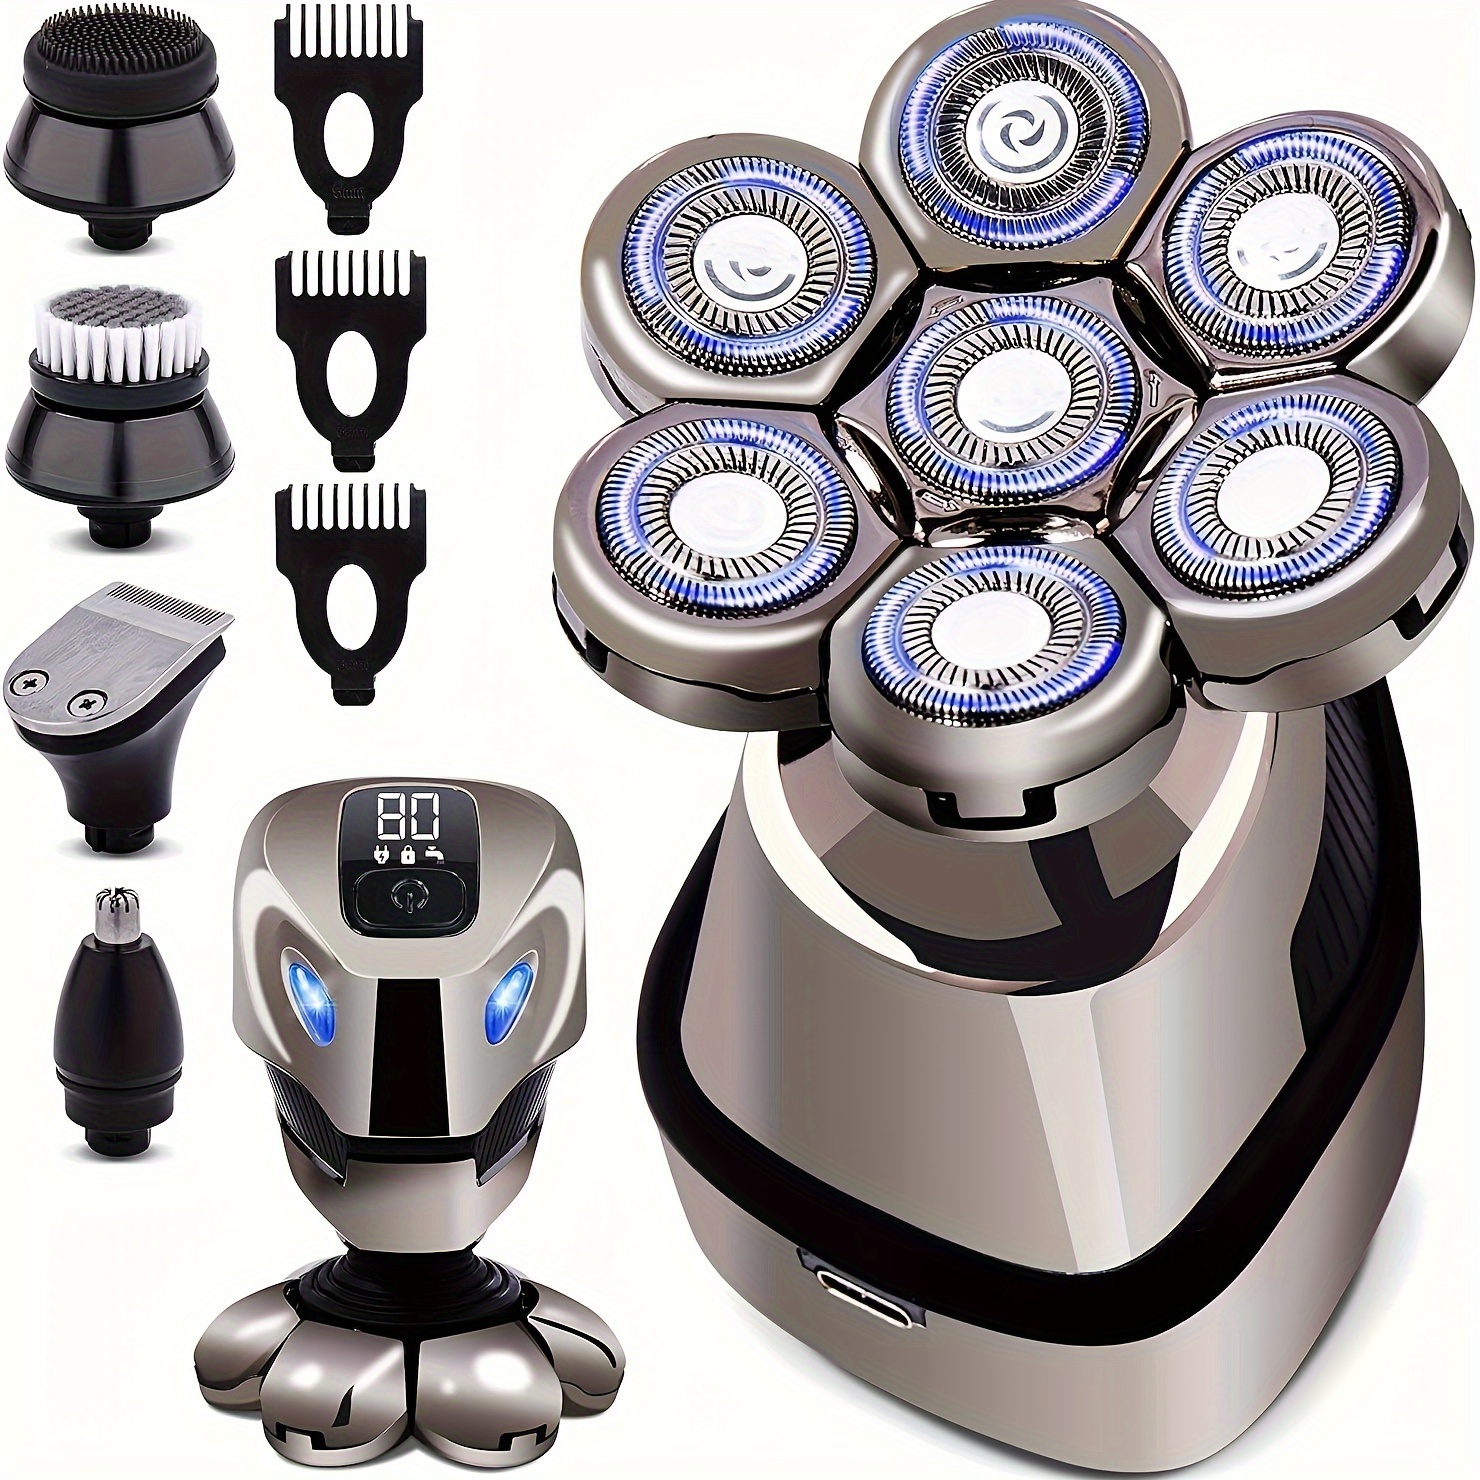 

5-in-1 Rechargeable Electric Head Shaver For Men - Wet/dry Bald Head Grooming Kit